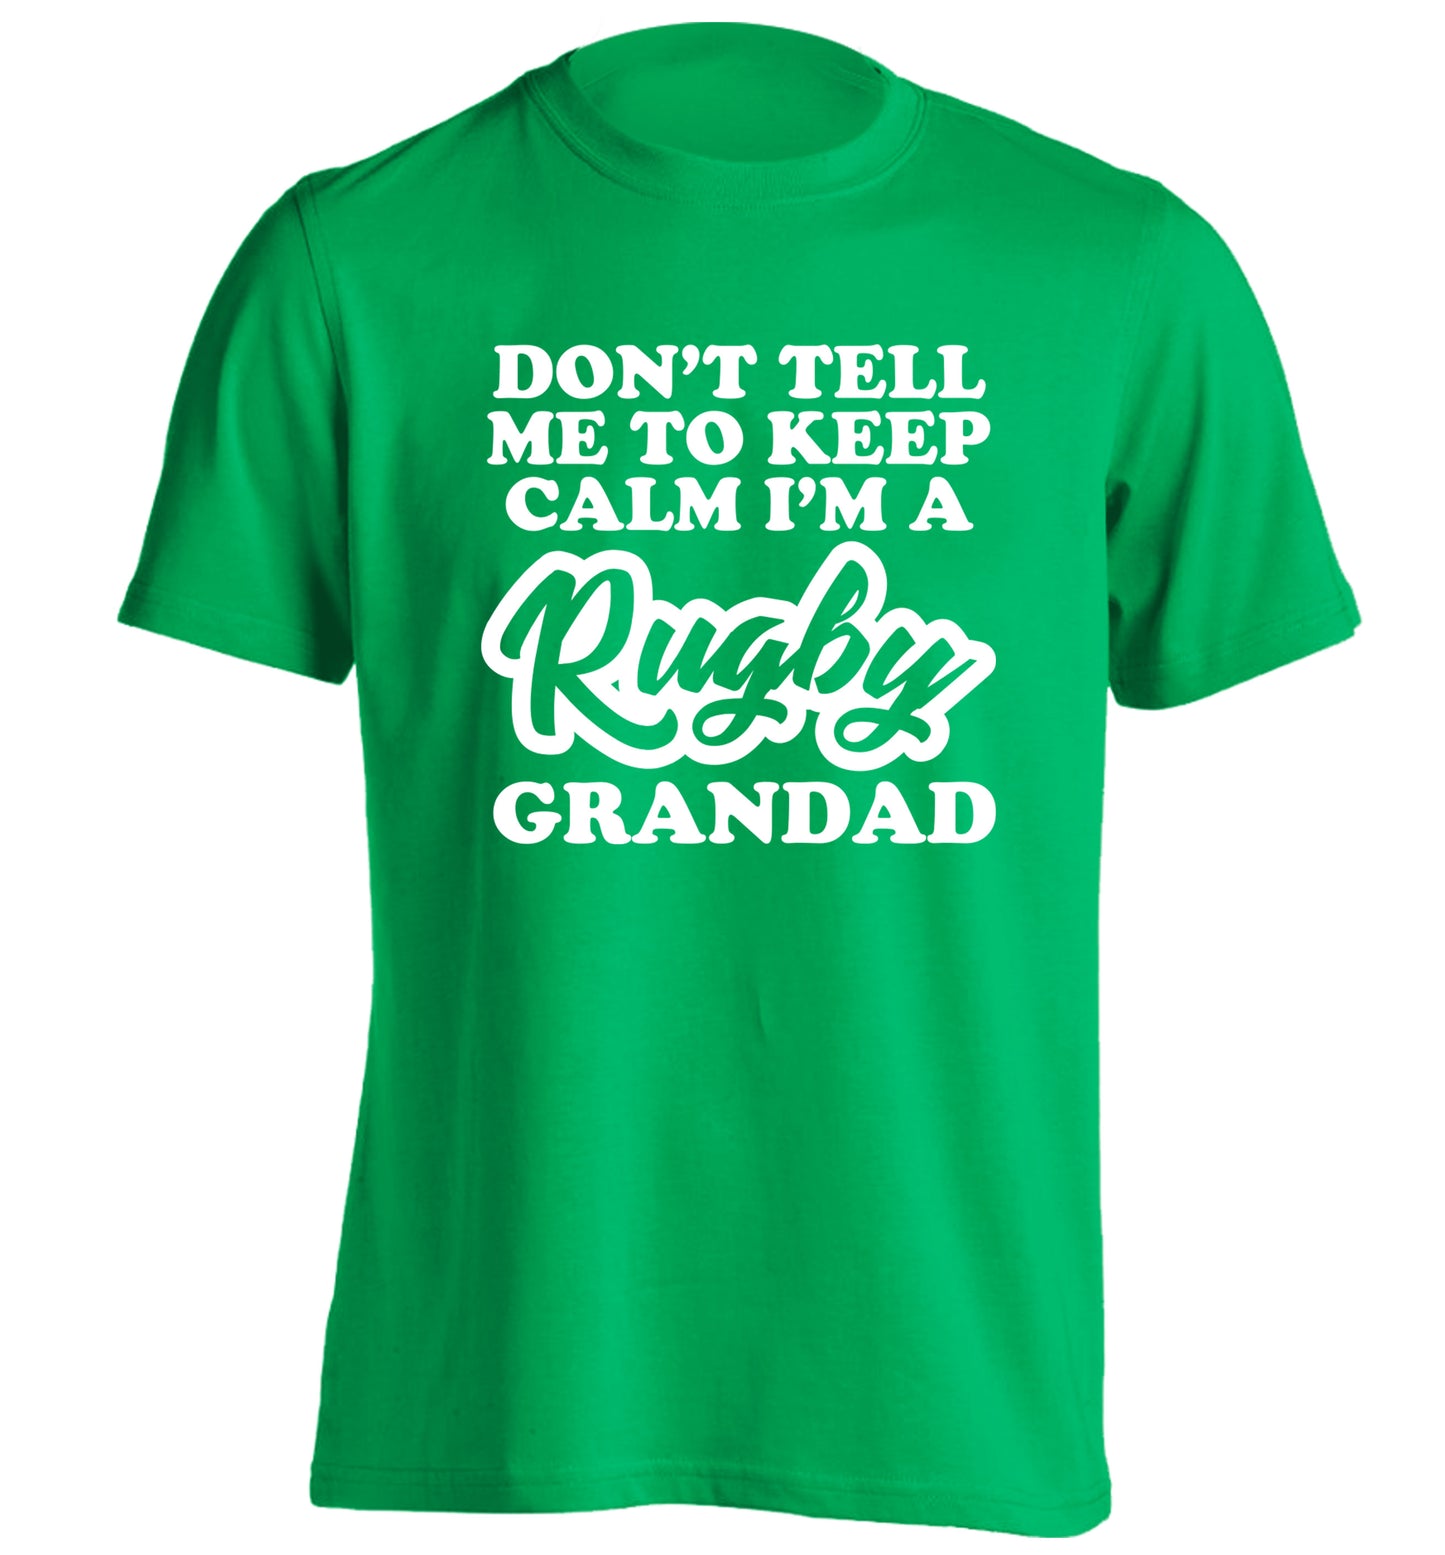 Don't tell me to keep calm I'm a rugby dad adults unisex green Tshirt 2XL